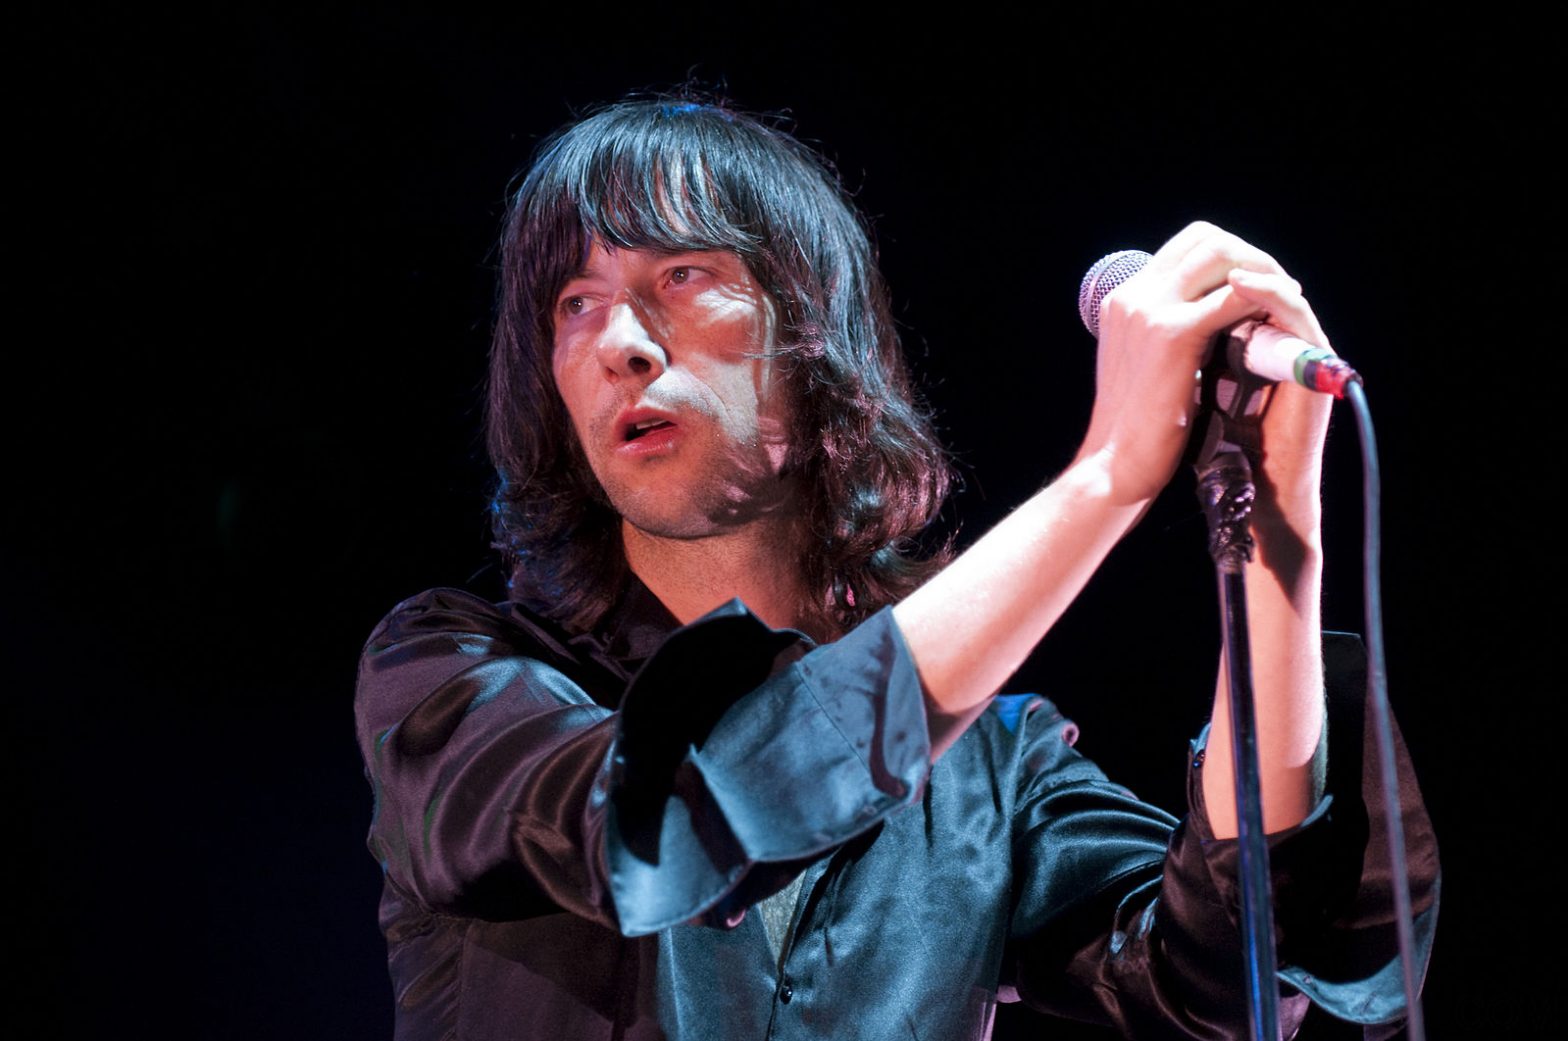 Bobby Gillespie Joins ISSA